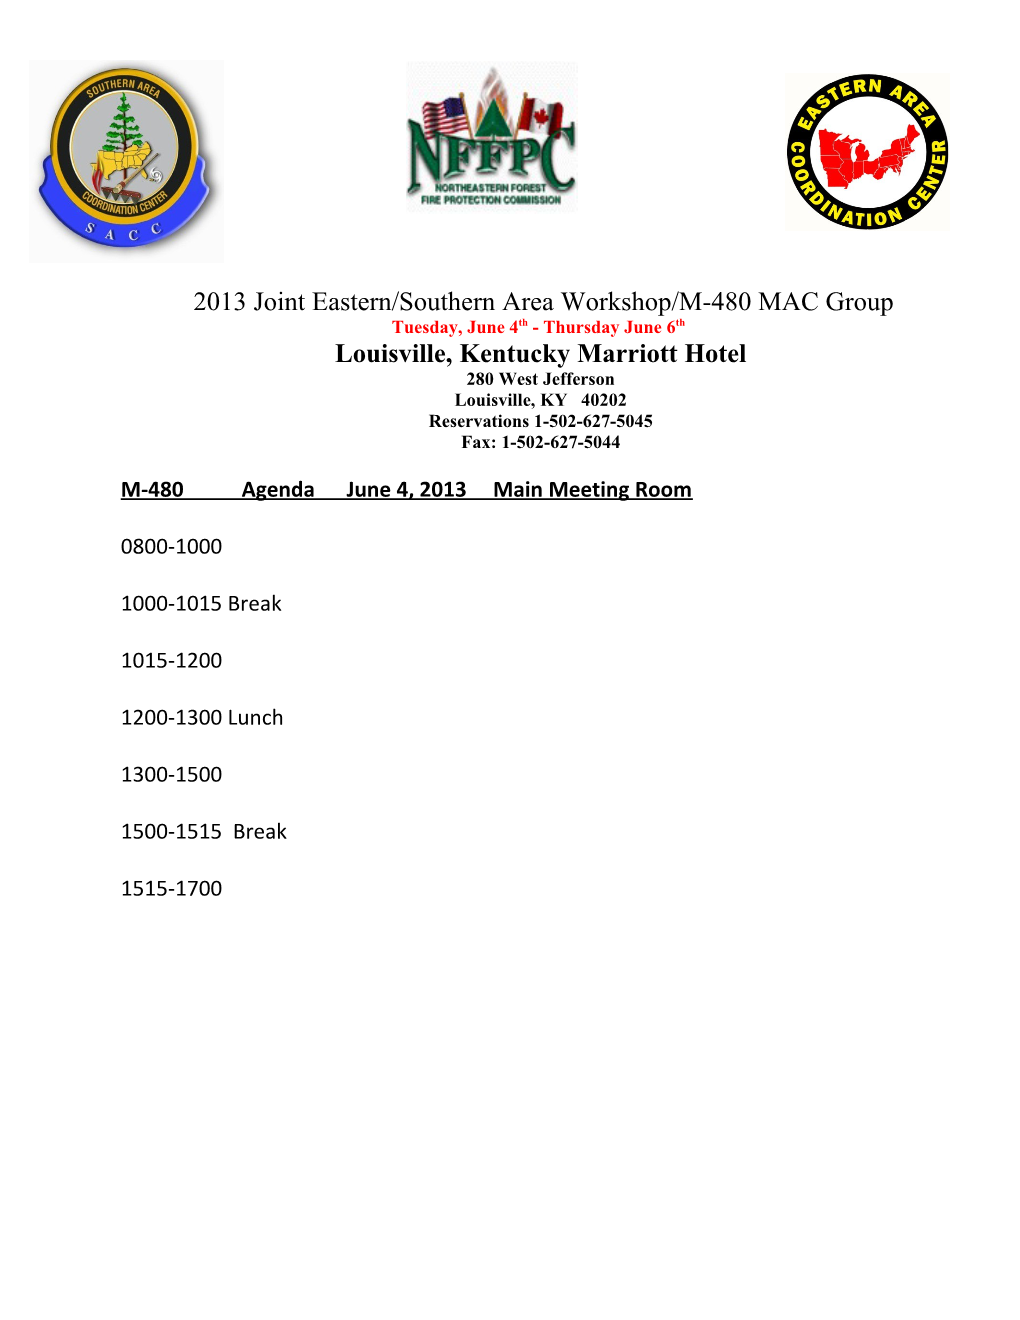 2013 Joint Eastern/Southern Area Workshop/M-480 MAC Group